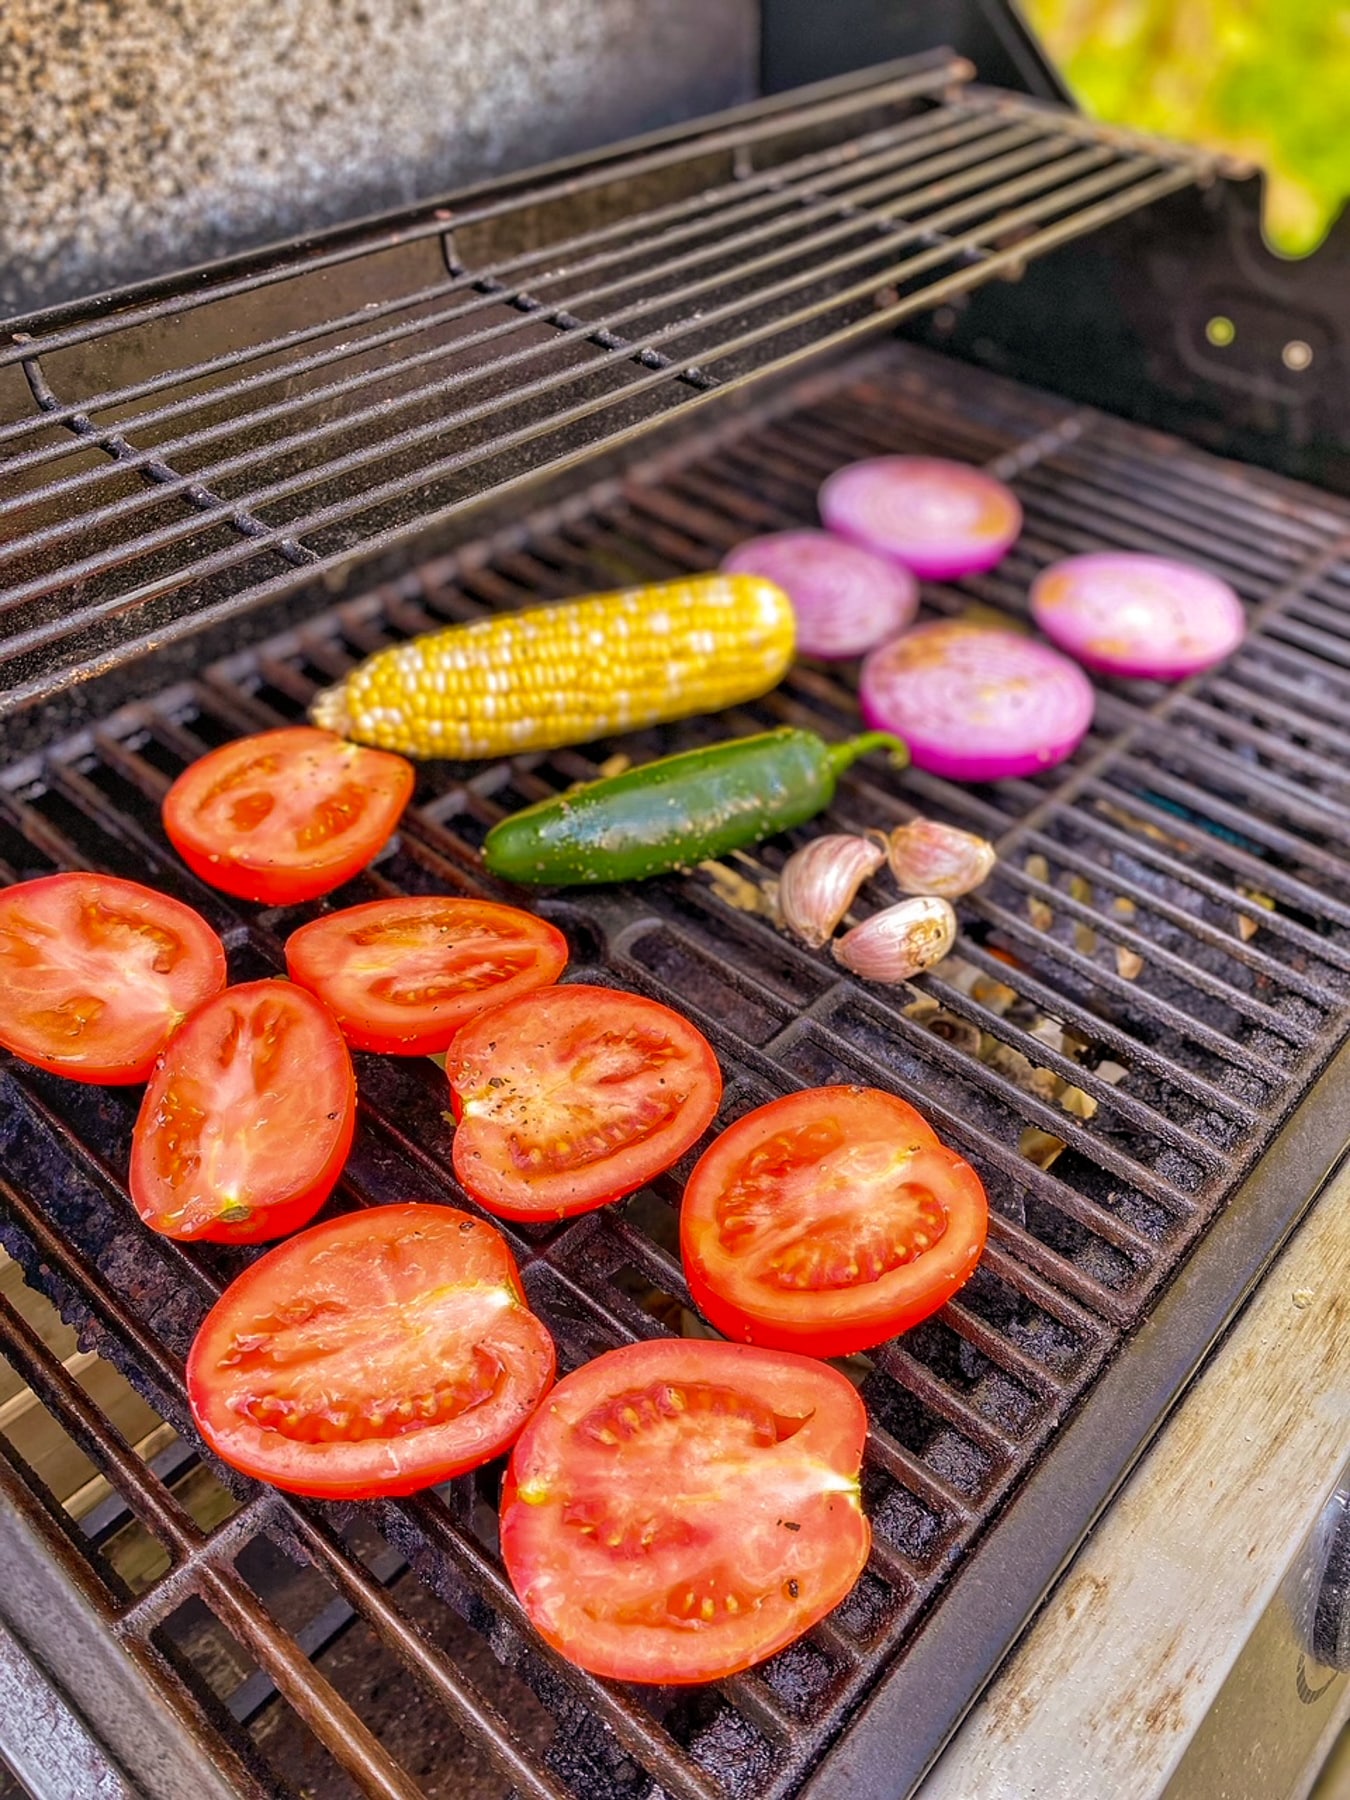 Ingredients for salsa placed on a hot grill.